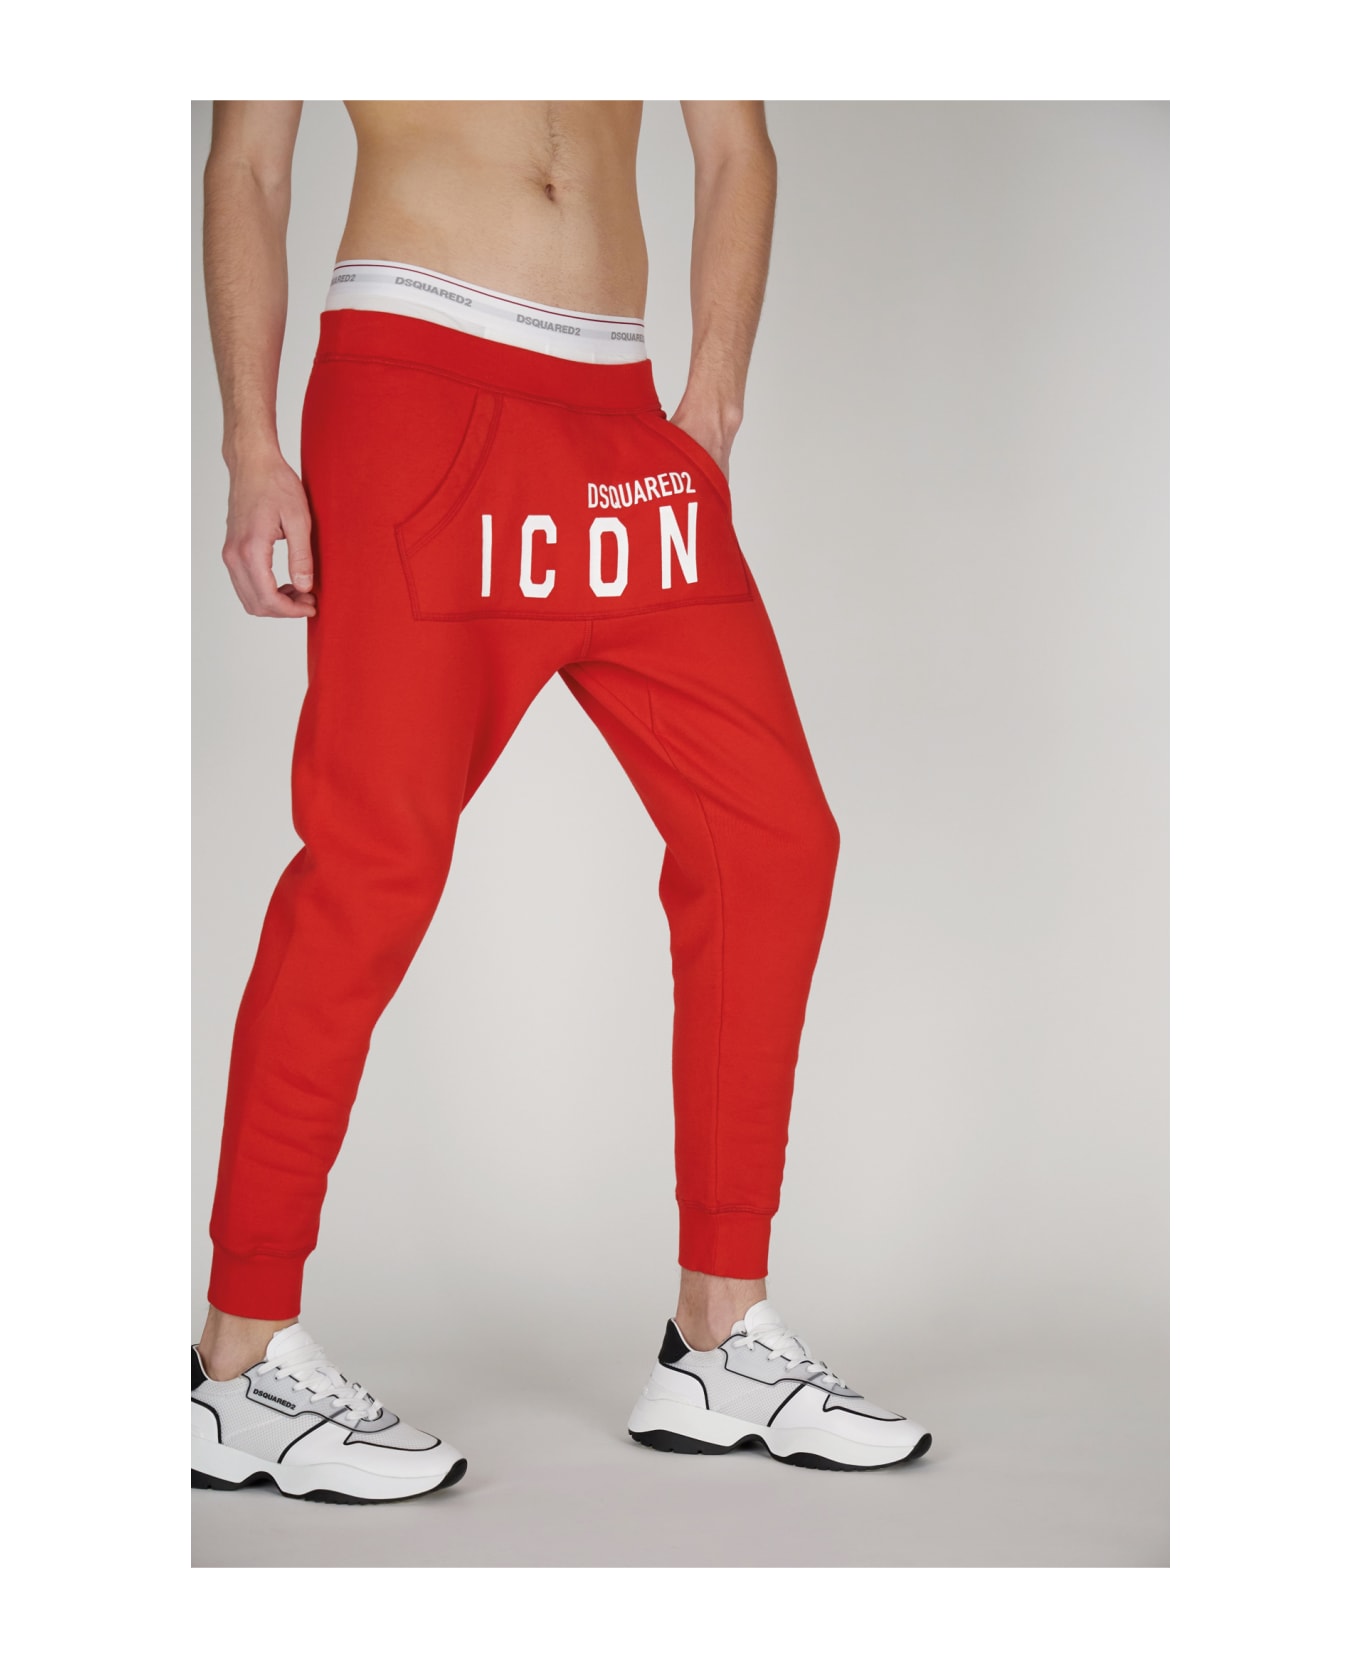 Dsquared2 Pants - Red